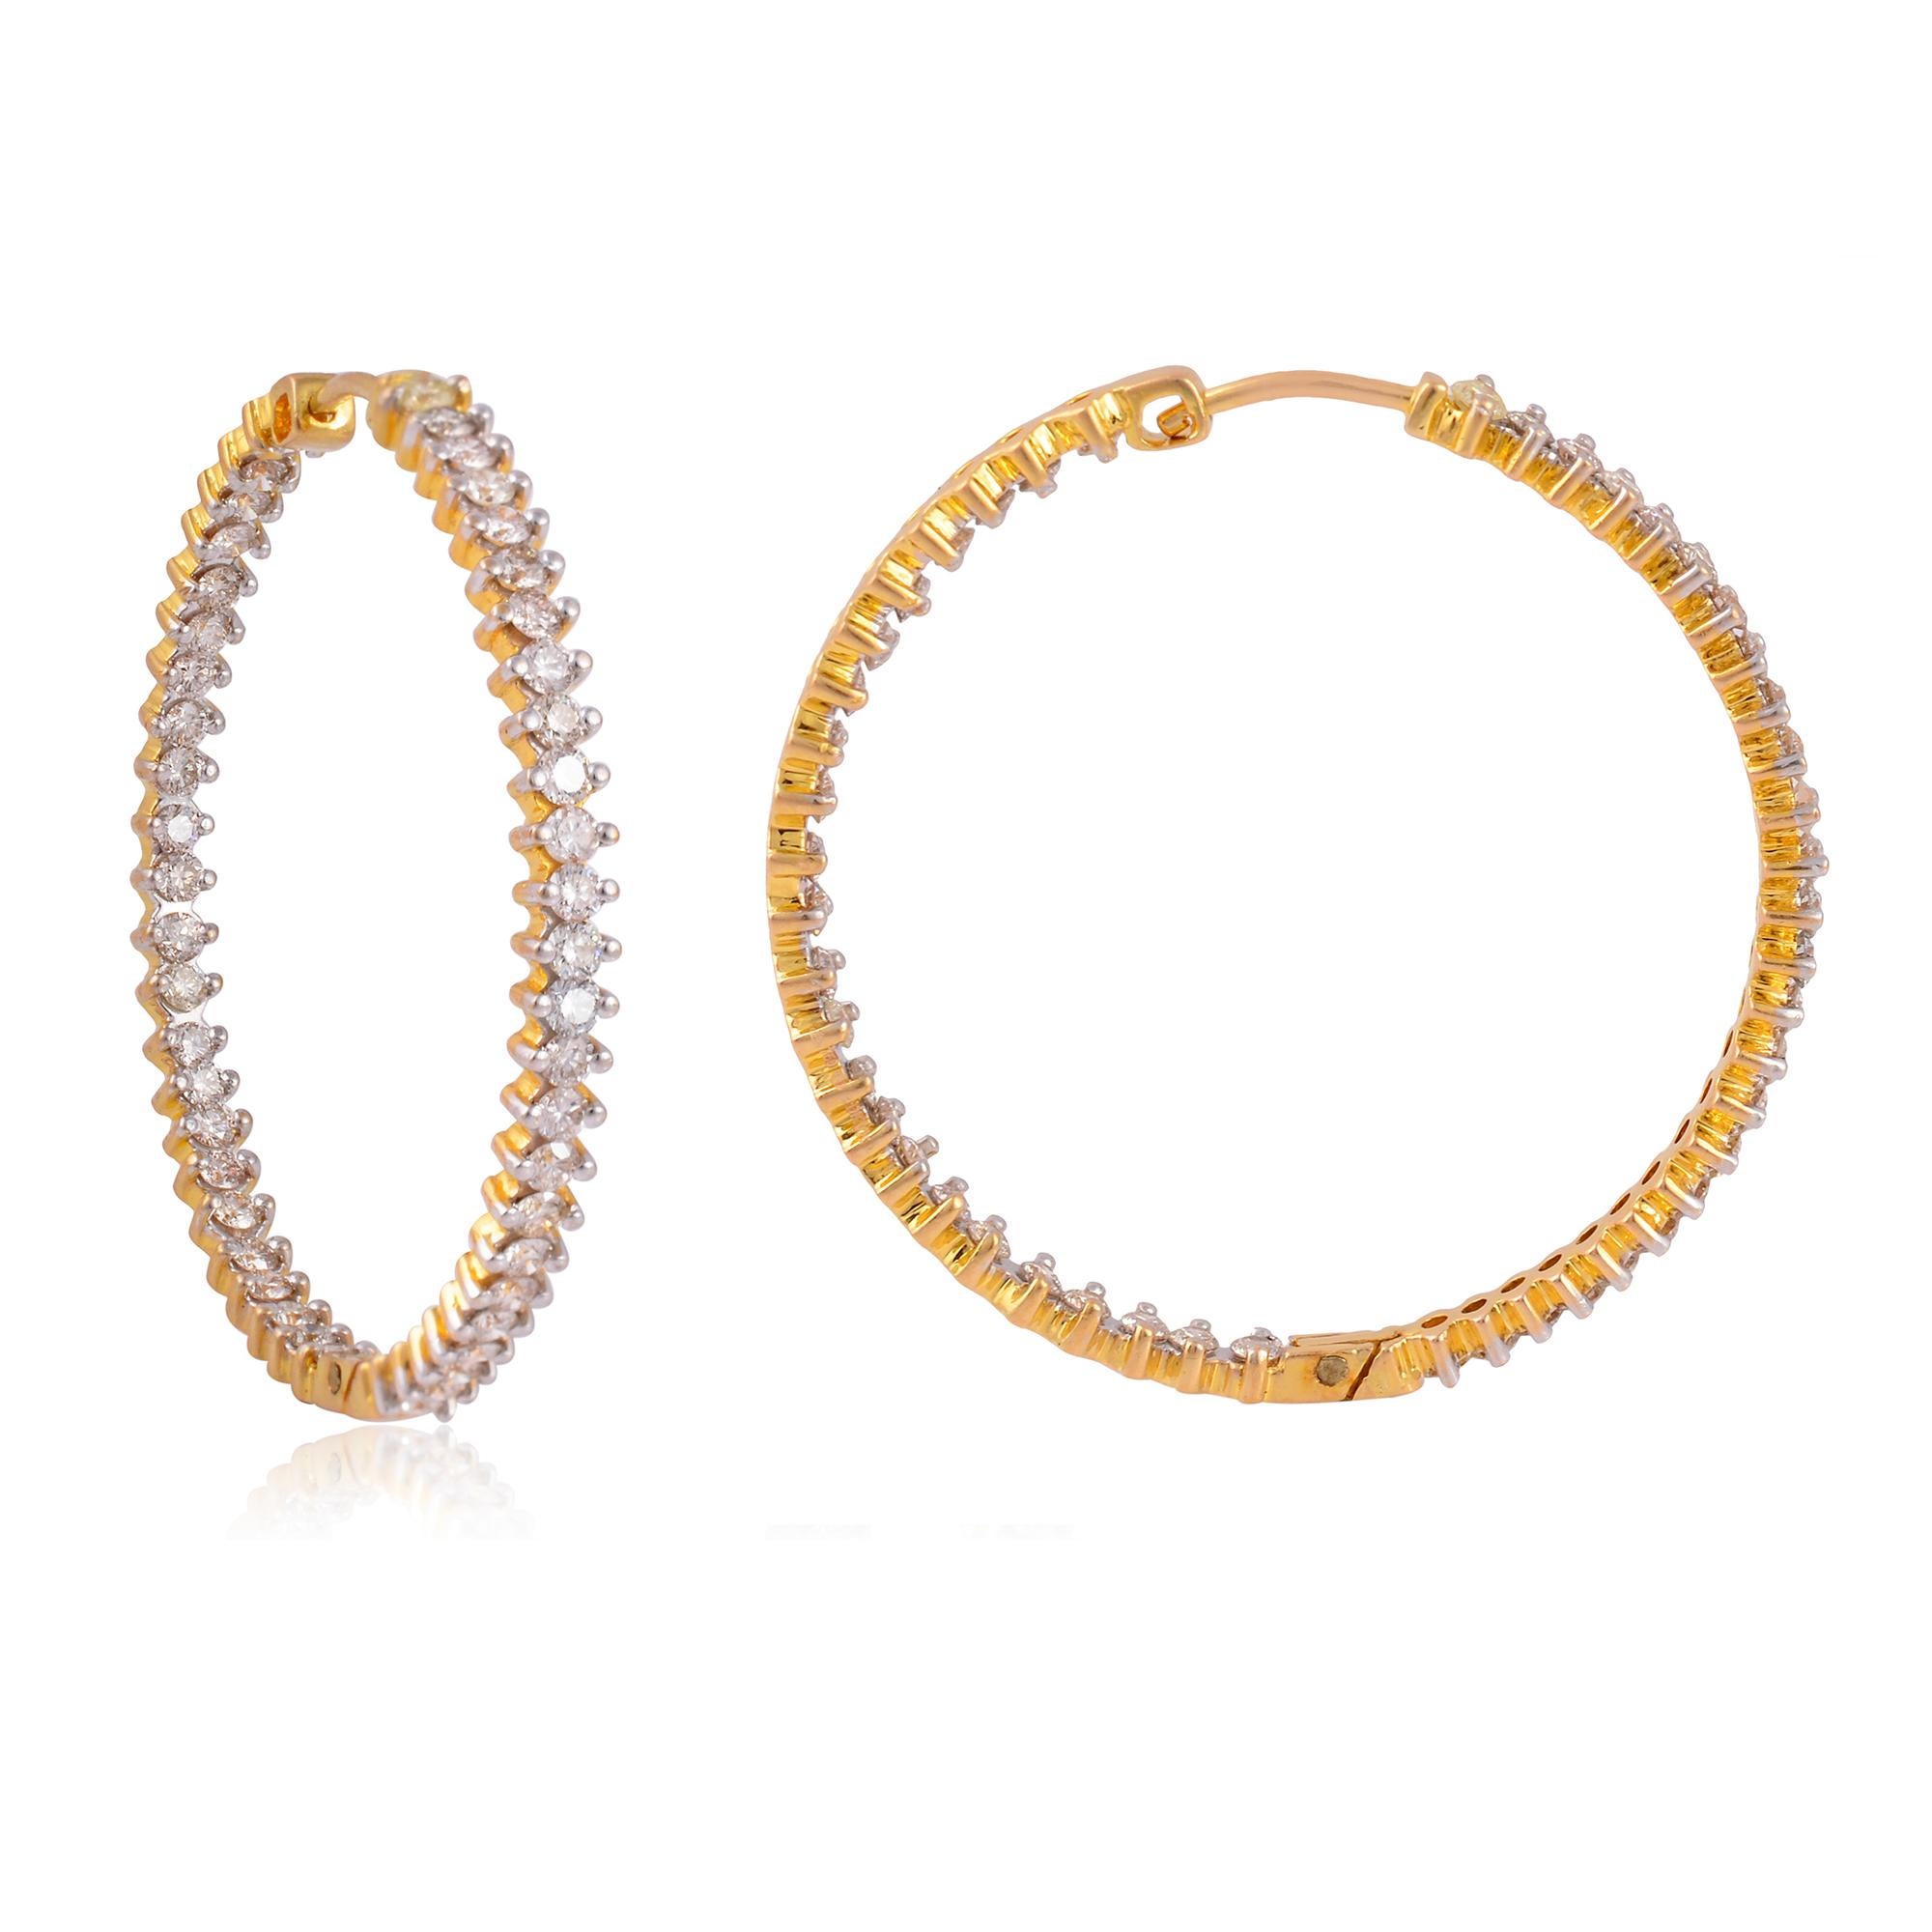 The diamonds are set in 18 karat yellow gold, a beautiful and classic choice for fine jewelry. Yellow gold has a warm and rich tone that complements the brilliance of the diamonds.
The hoop design adds a touch of elegance and versatility to the